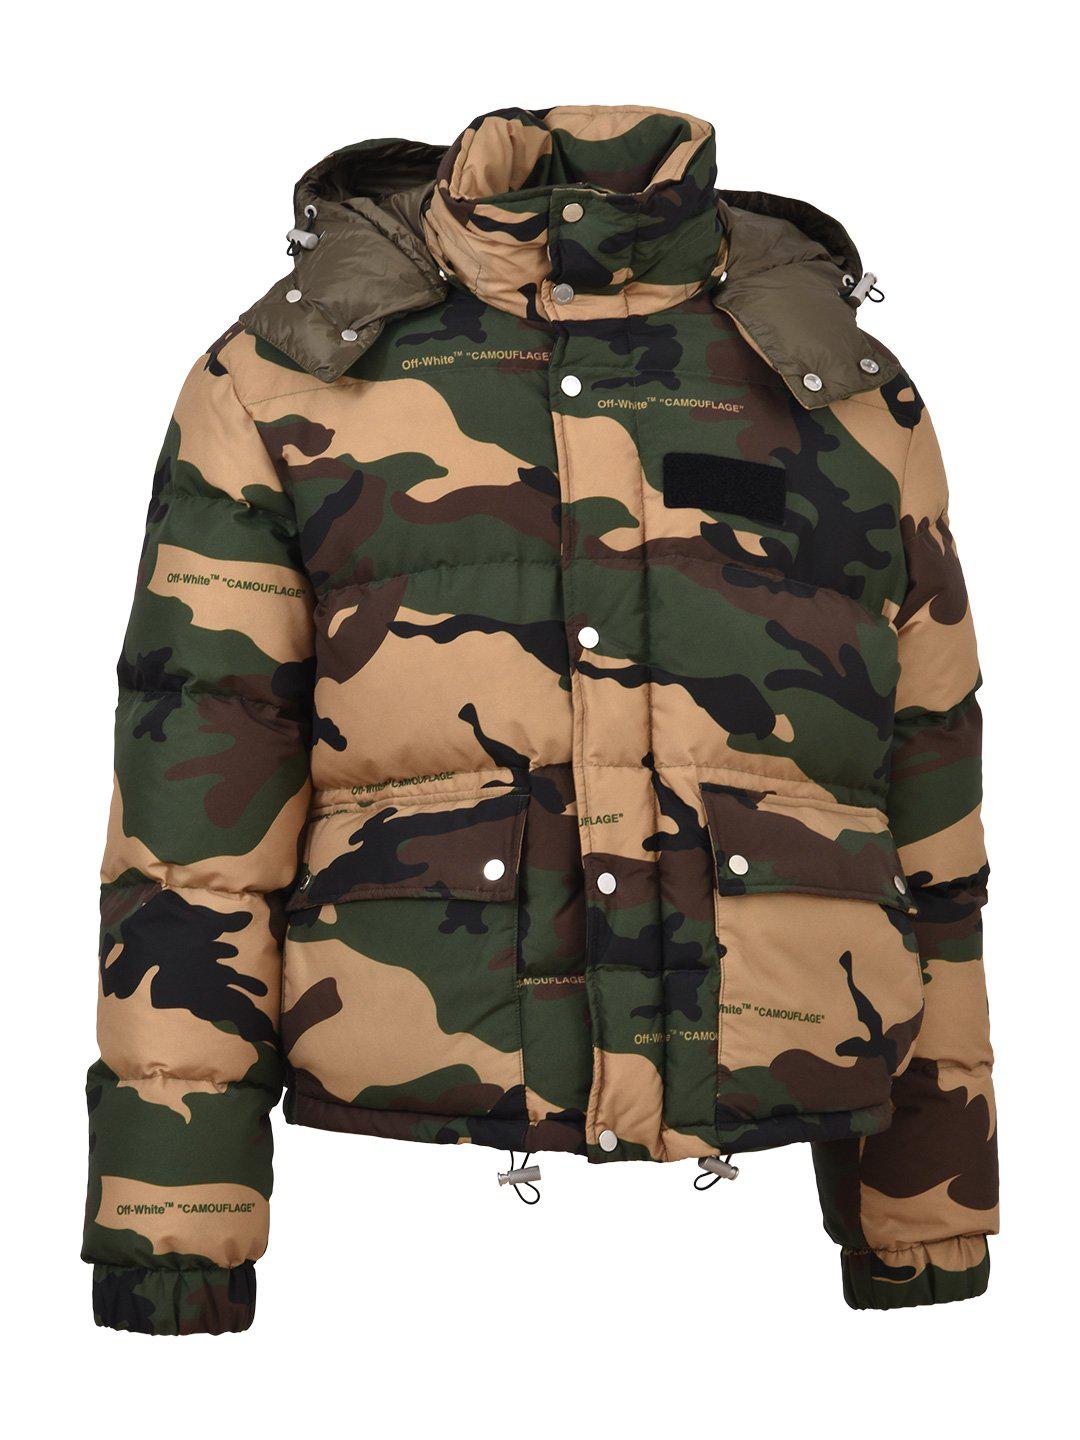 Off-White c/o Virgil Abloh Synthetic Camouflage Puffer Jacket for Men - Lyst